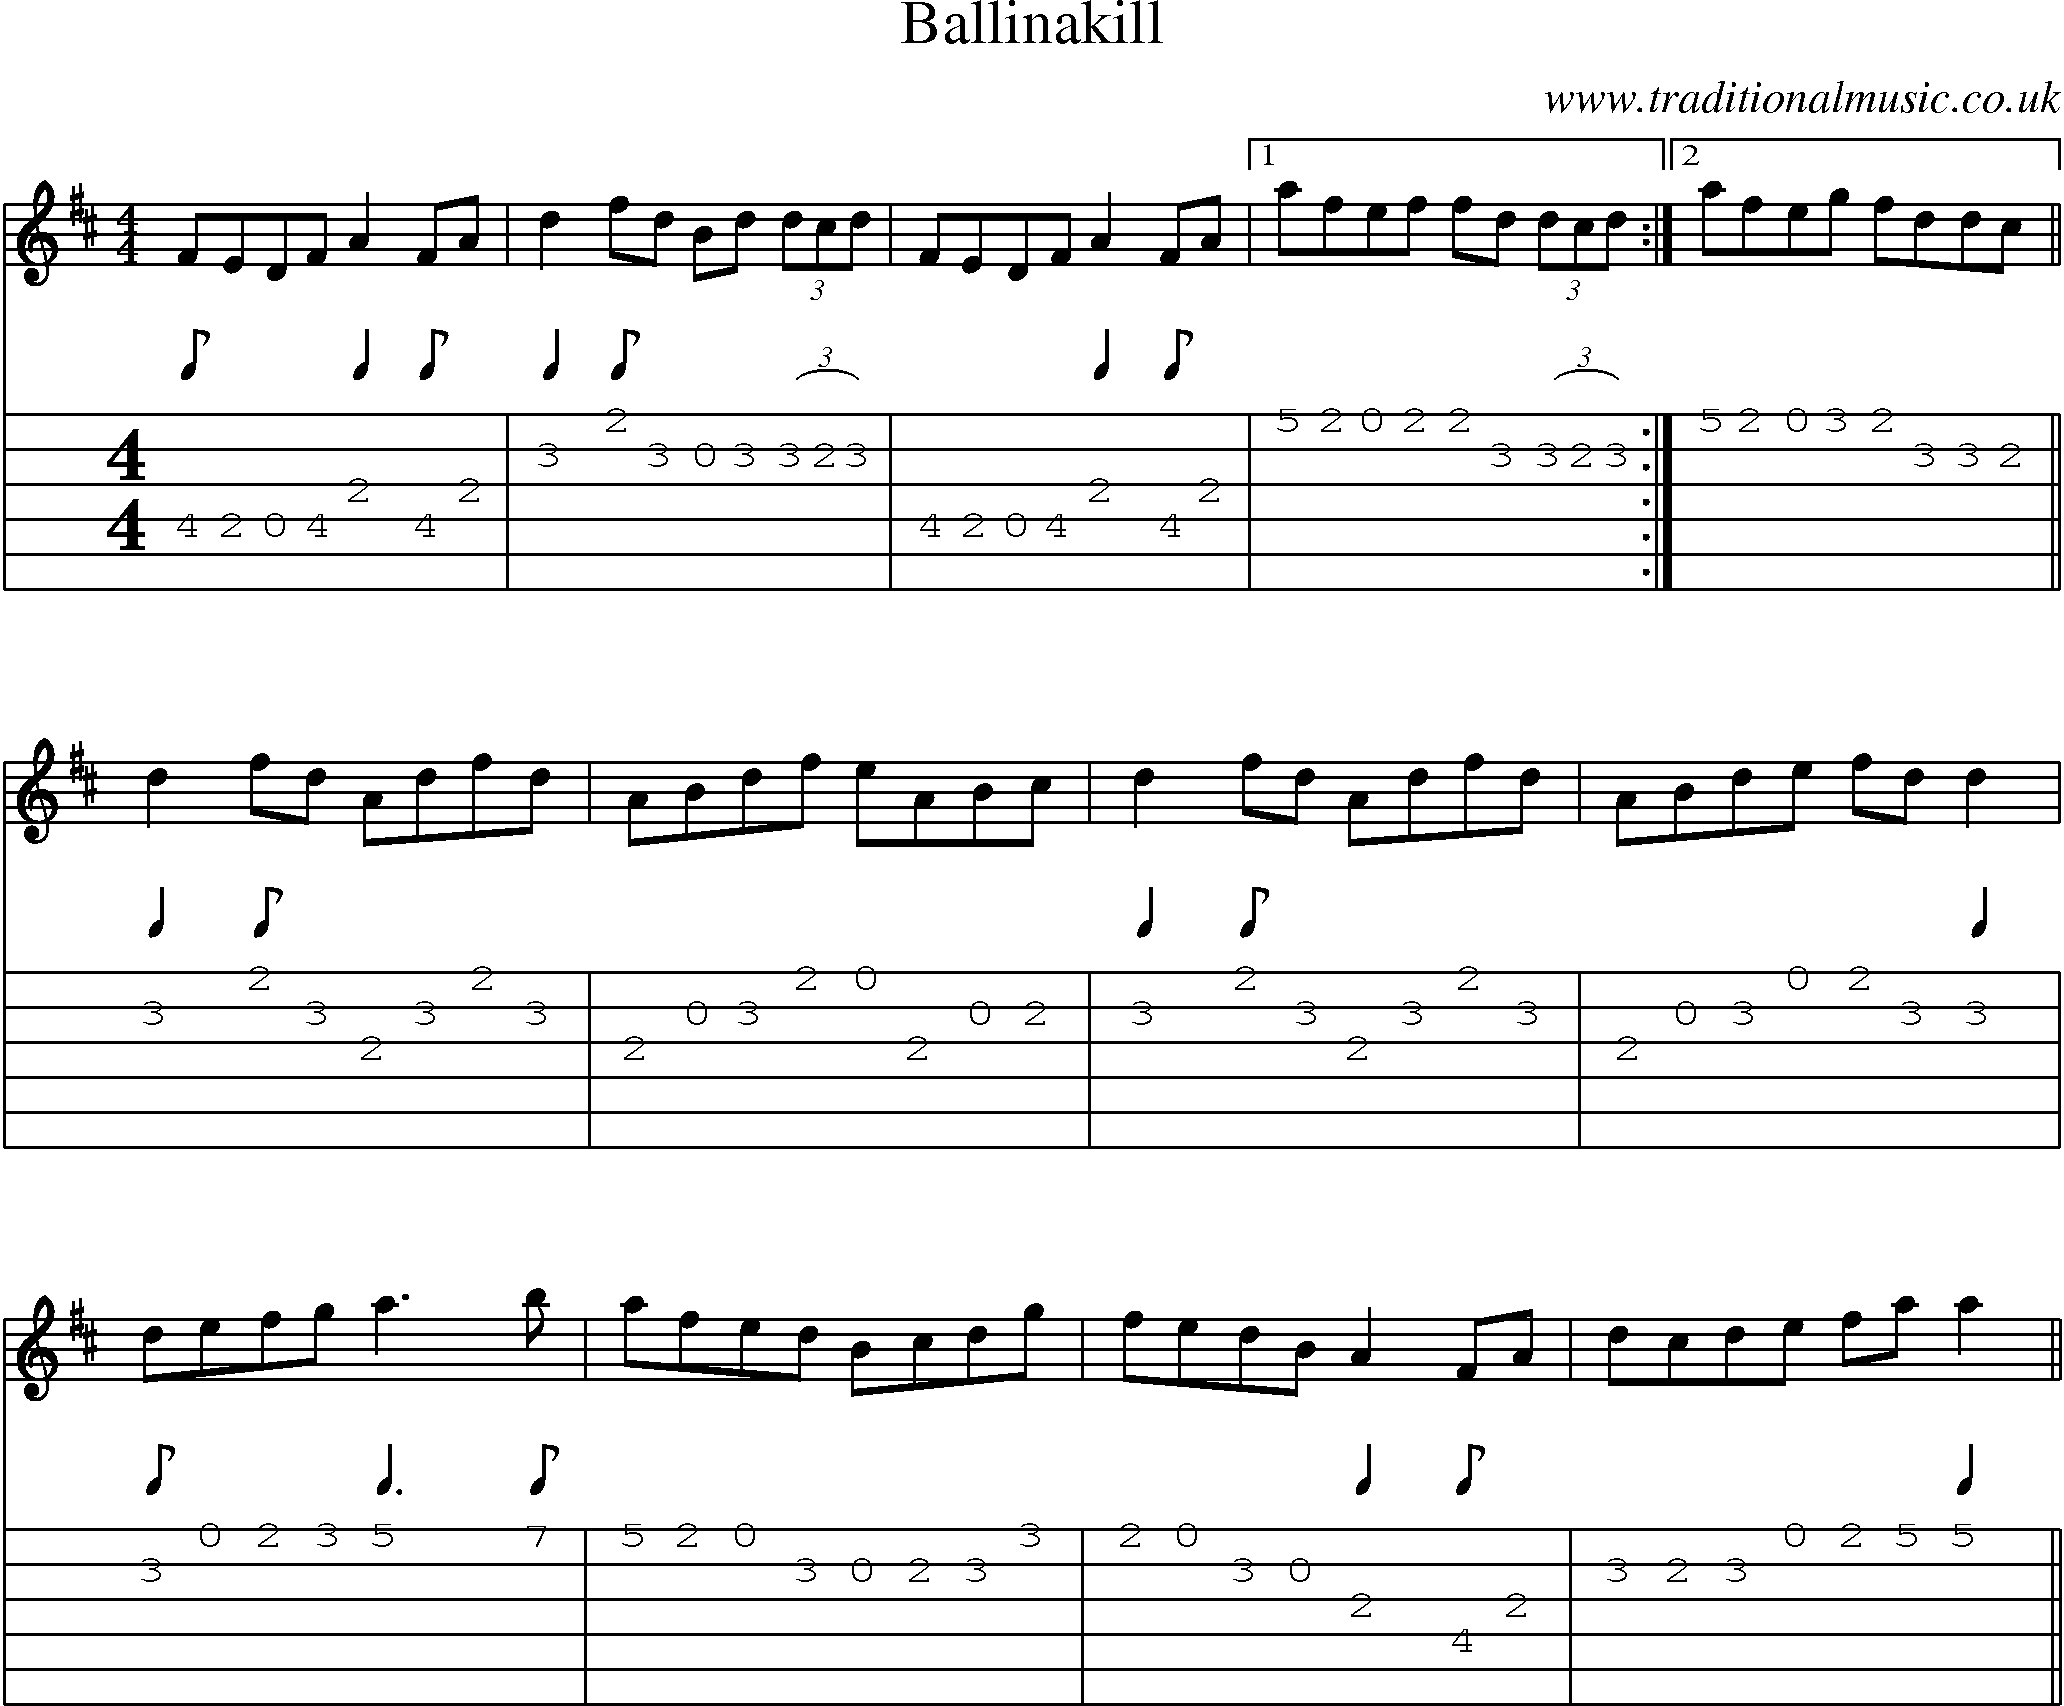 Music Score and Guitar Tabs for Ballinakill